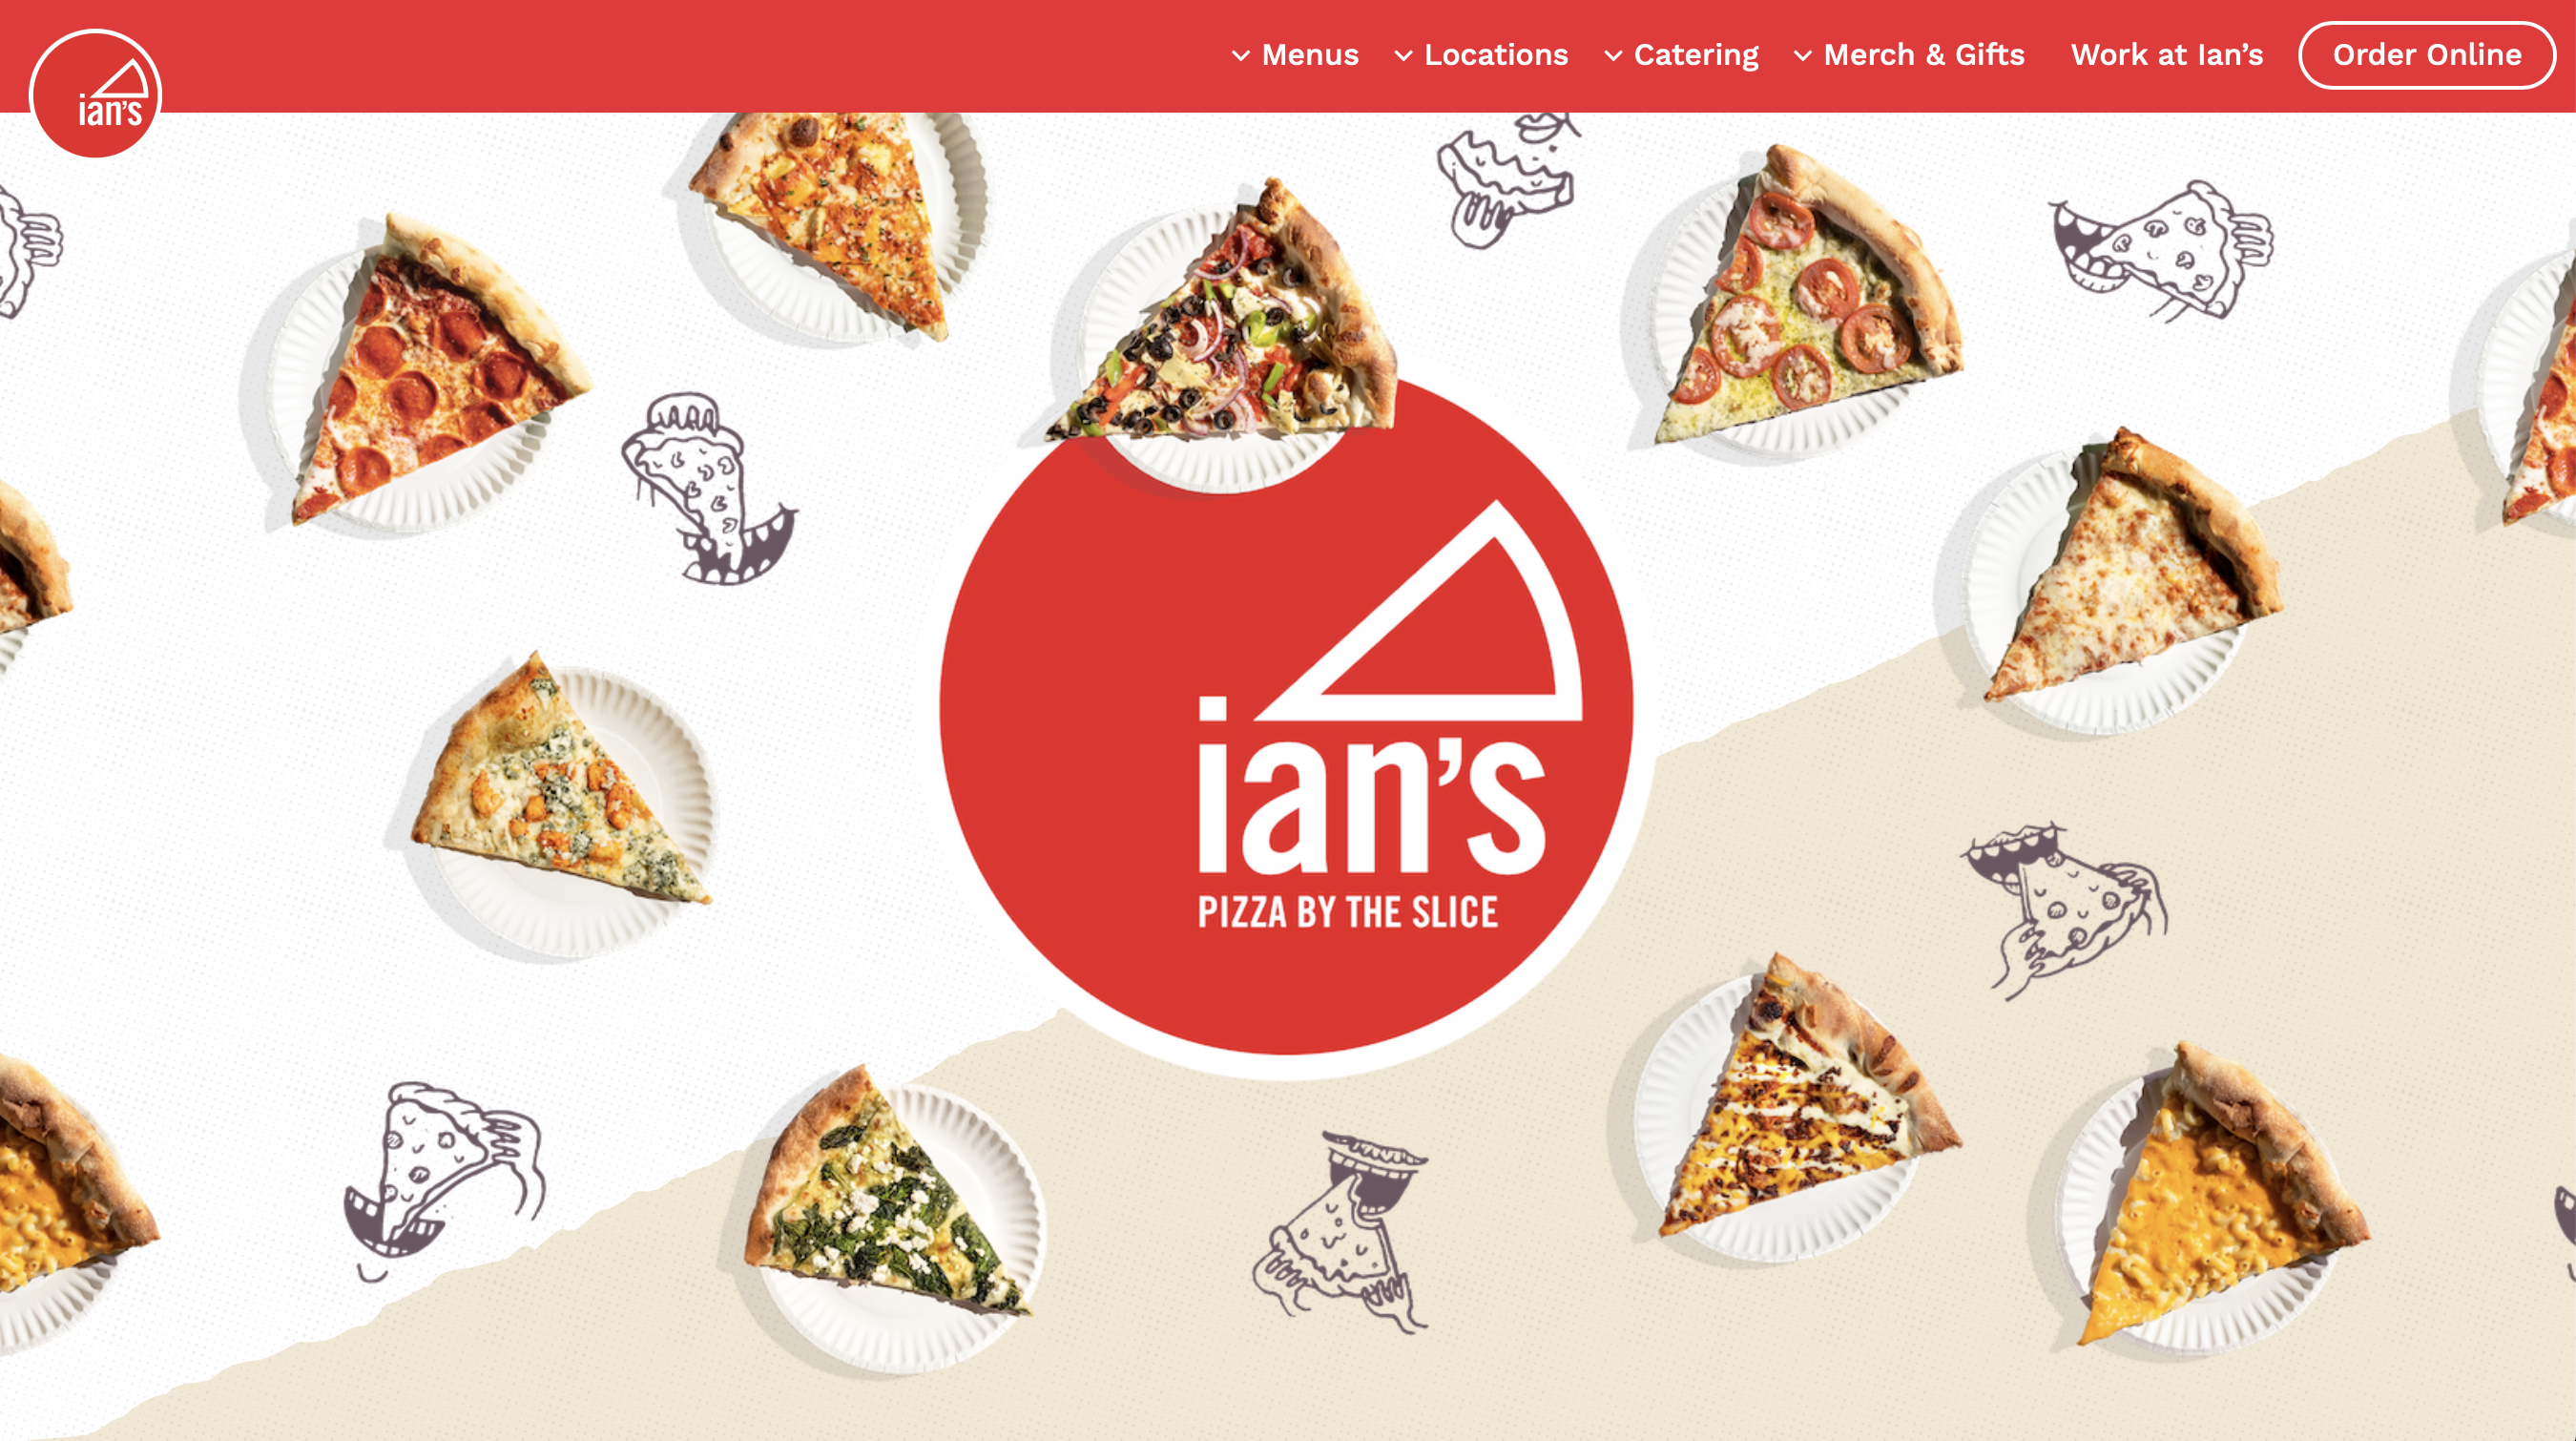 Ian’s Pizza Website Redesign: A Strategic Investment for Long-Term Growth